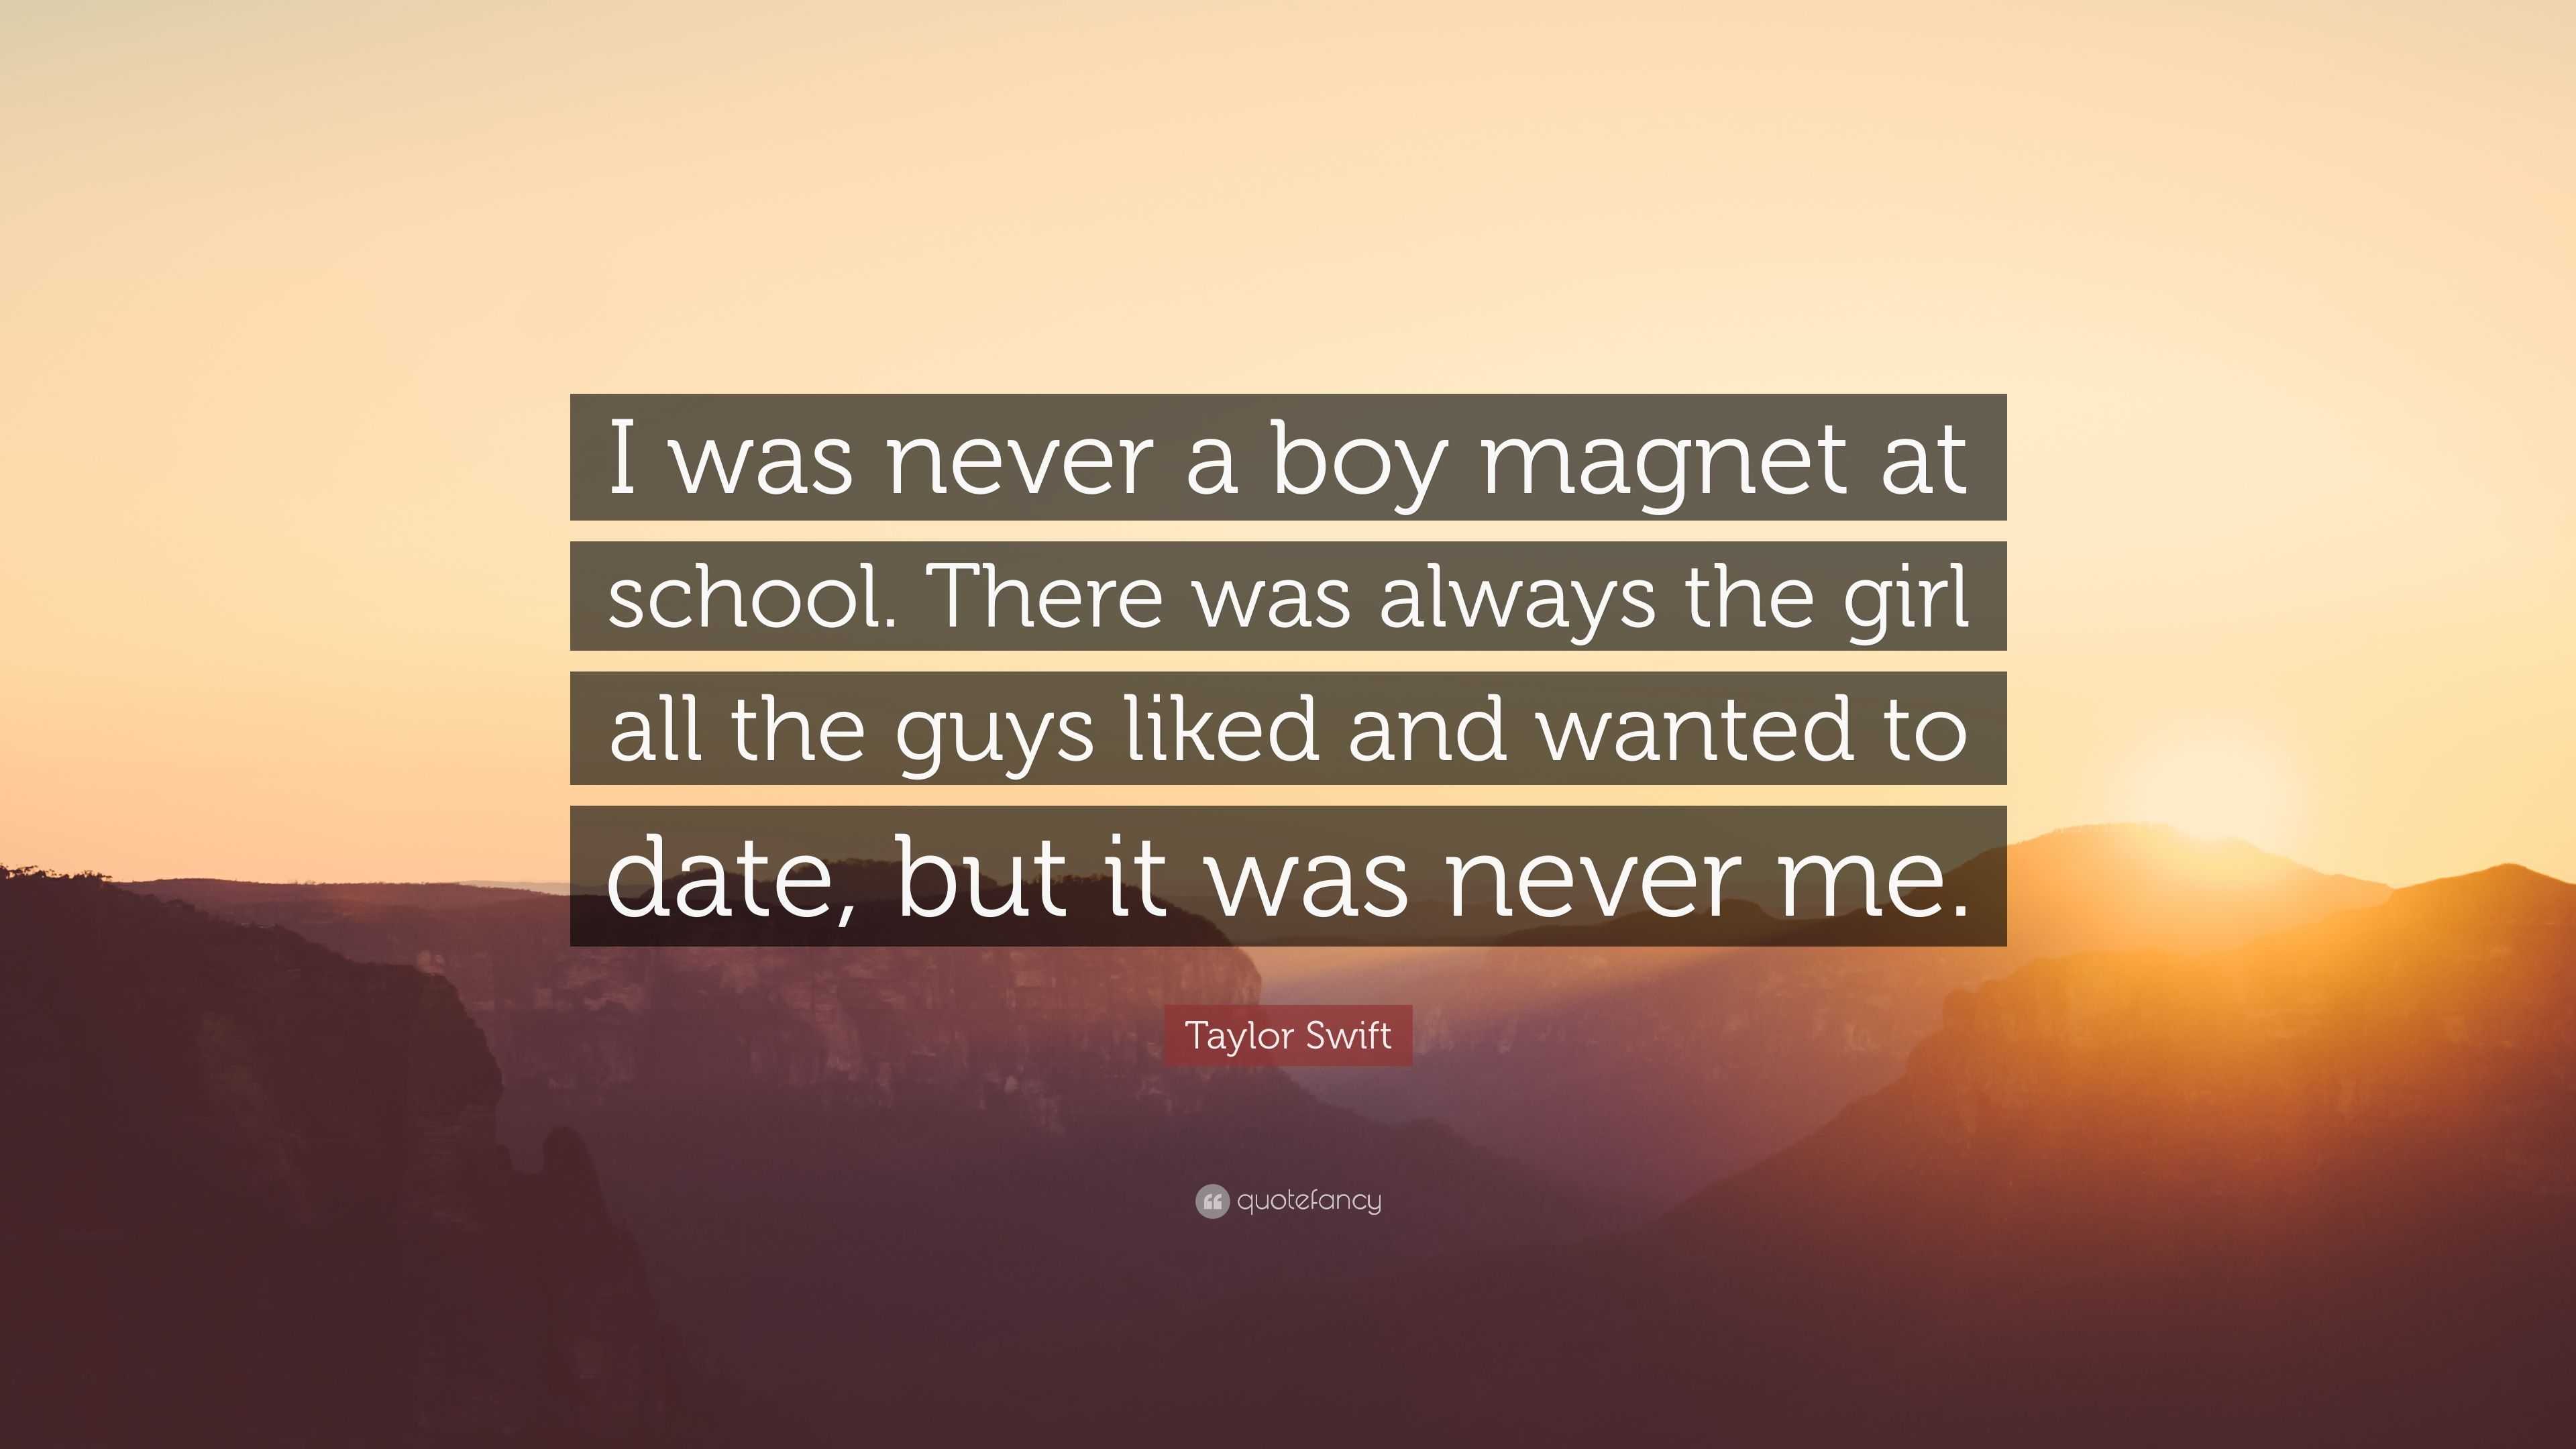 Taylor Swift Quote: “I was never a boy magnet at school. There was